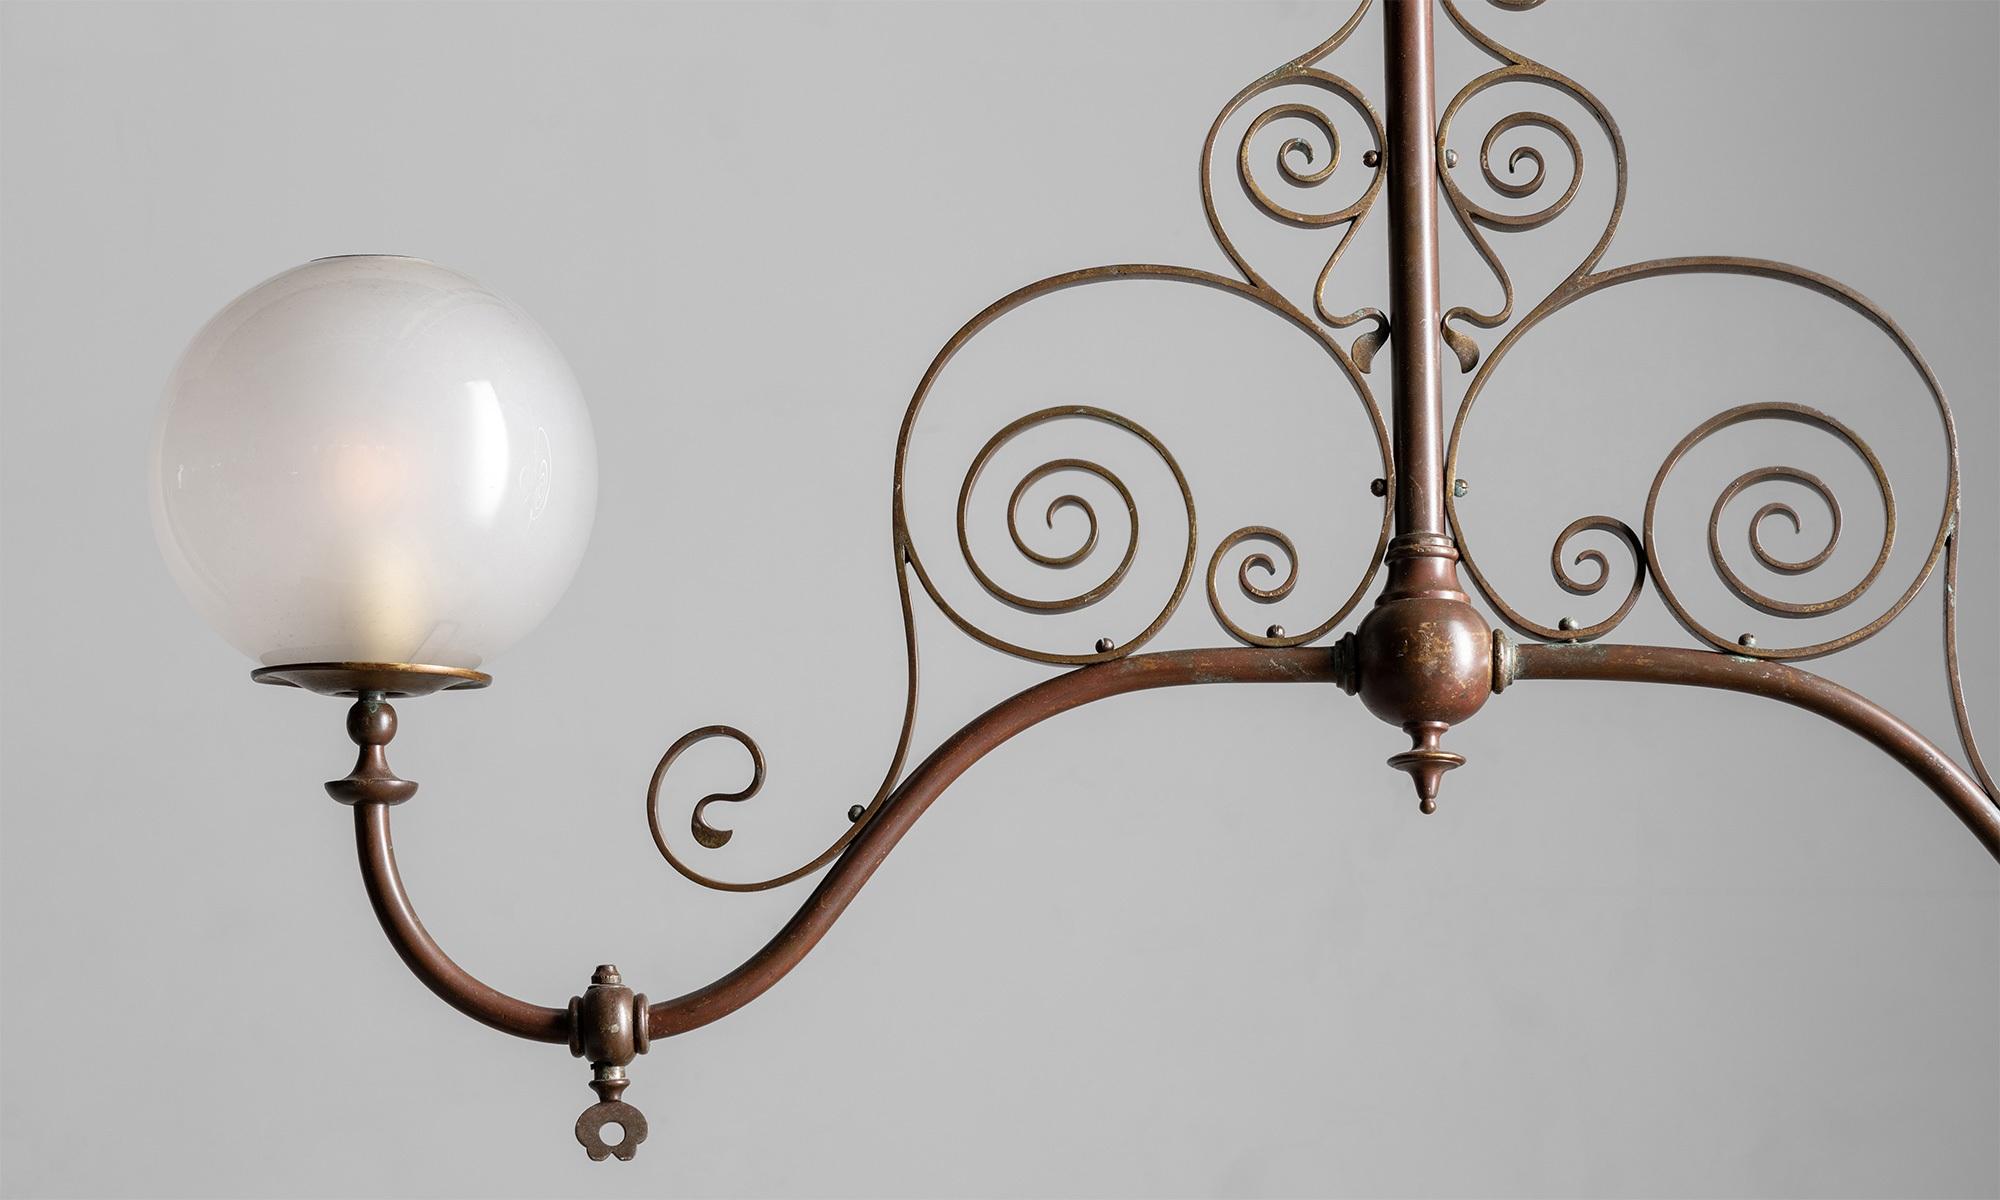 Victorian double gas light

England Circa 1910

Ornated brass frame with acid etched globe shades. Originally lit by gas, recently converted to electric.

Measures: 43.5”W X 8”D X 72”H.